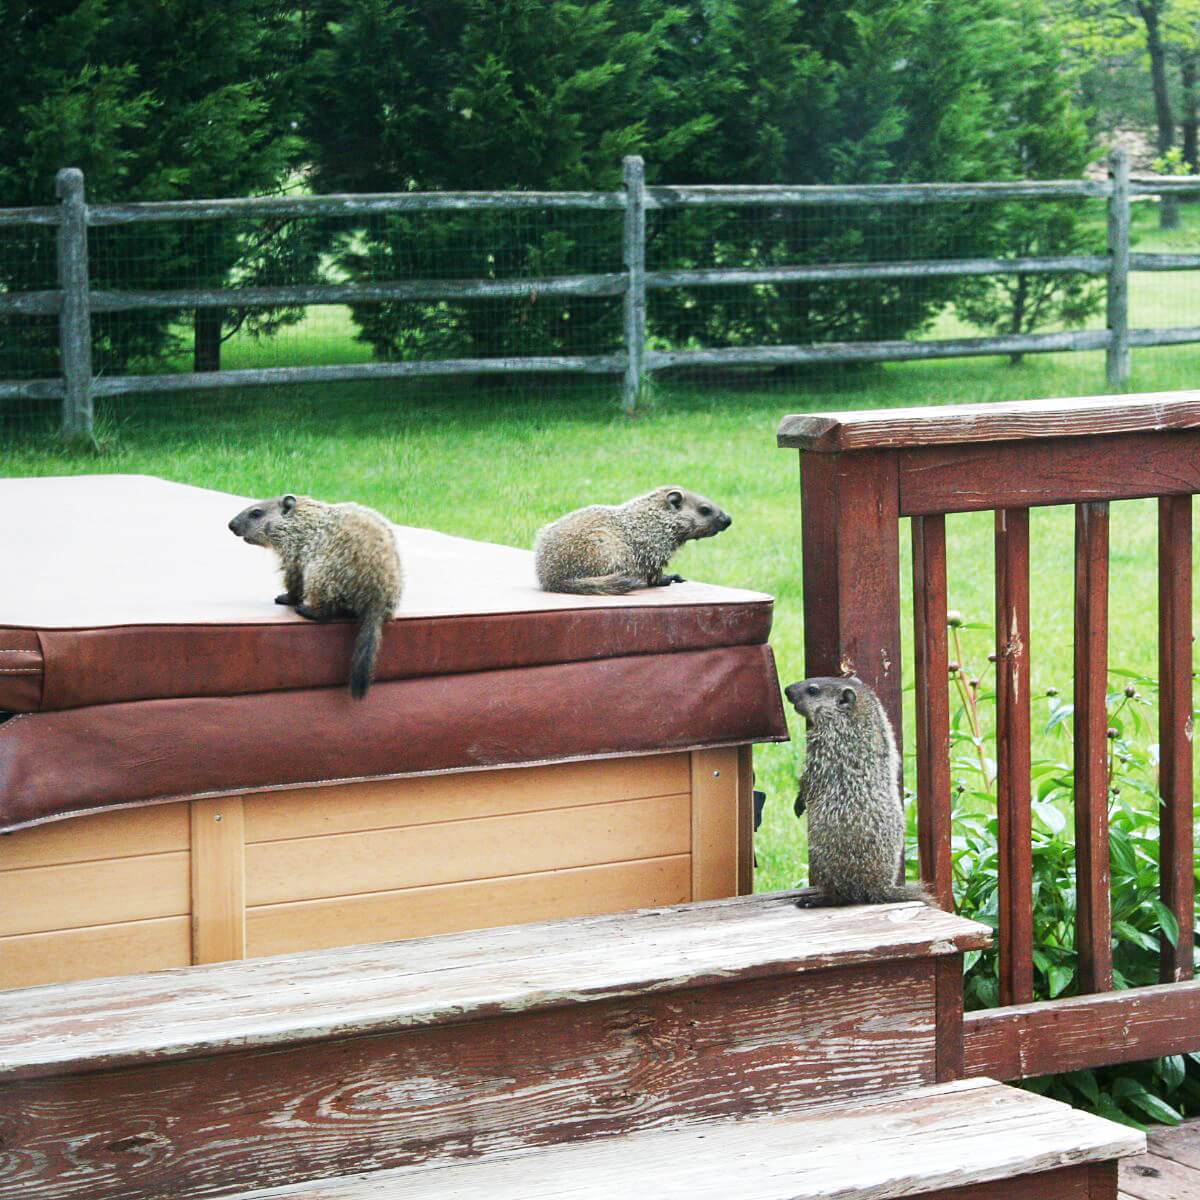 Three young groundhogs on deck and hot tub in backyard in 2013